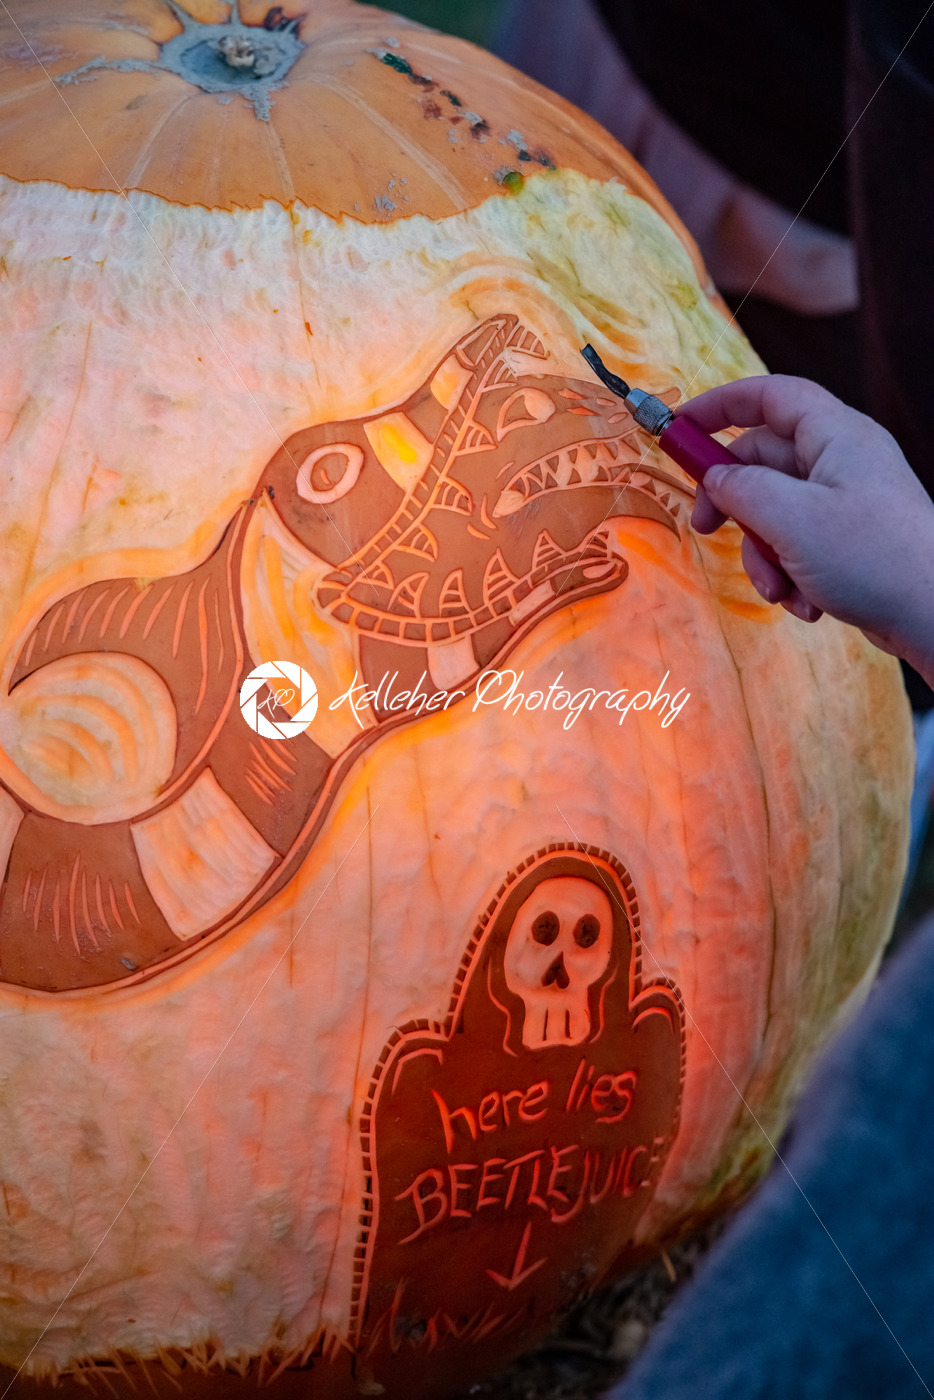 CHADDS FORD, PA – OCTOBER 18: Dragon and Bettlejuice Betelgeuse The Great Pumpkin Carve carving contest on October 18, 2018 - Kelleher Photography Store